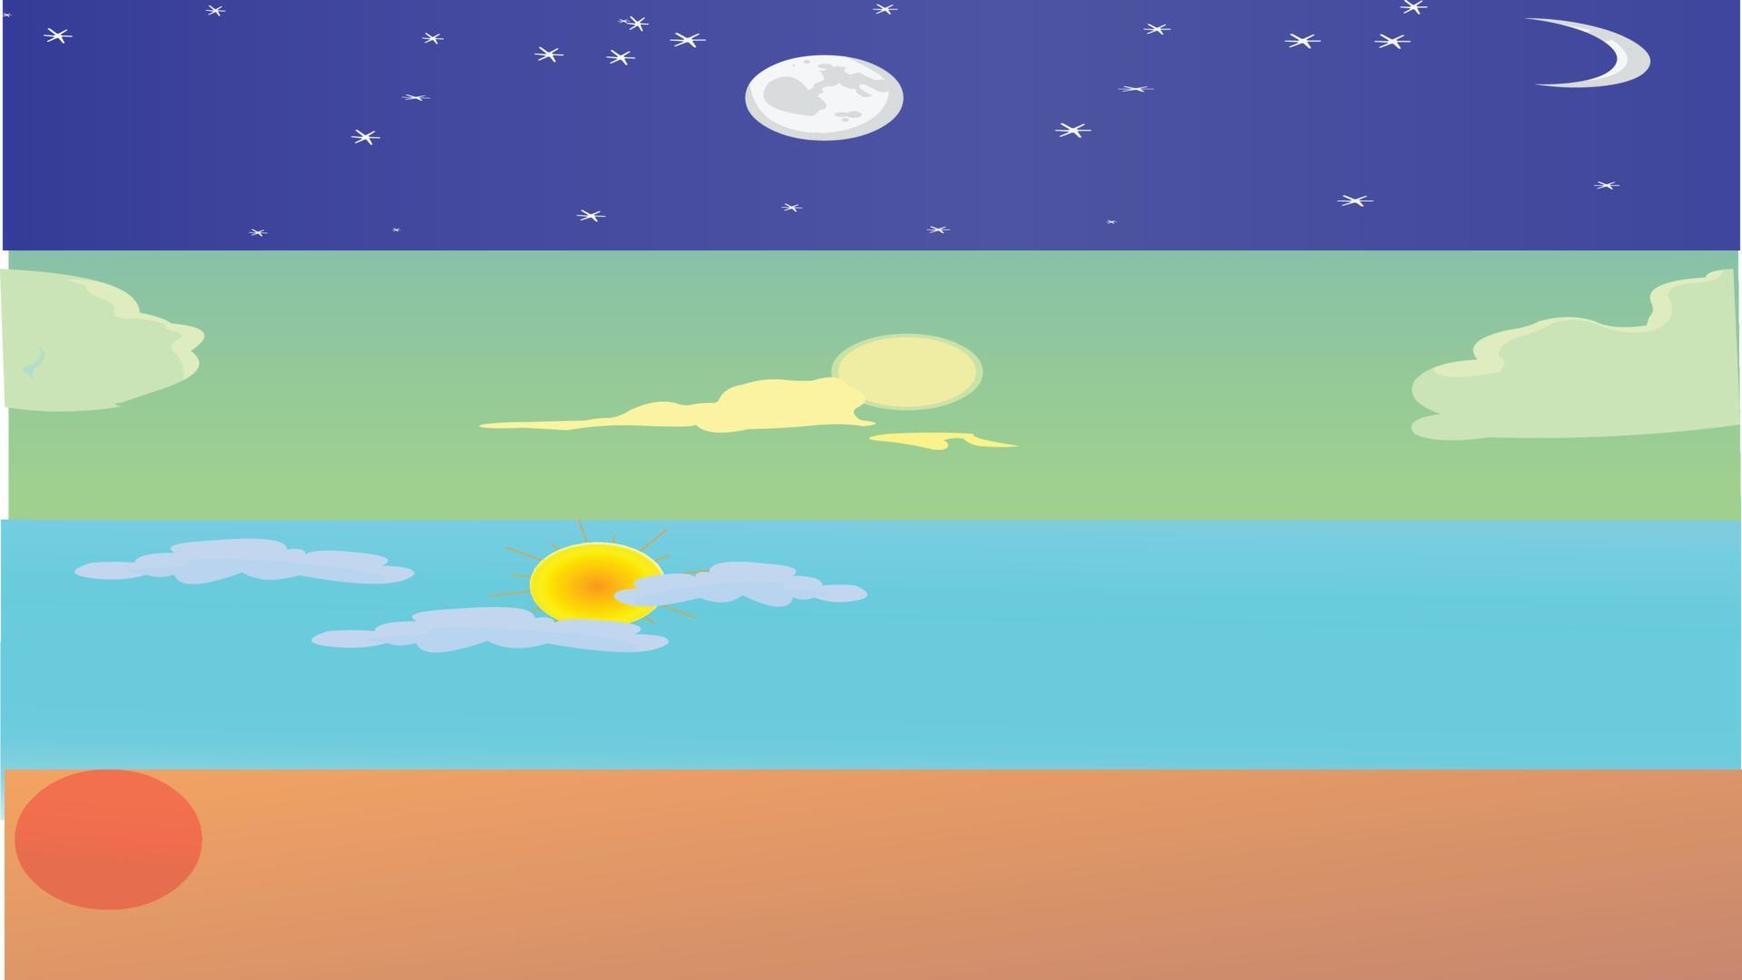 Sky different poses with moon, sun stars, clouds artwork vector